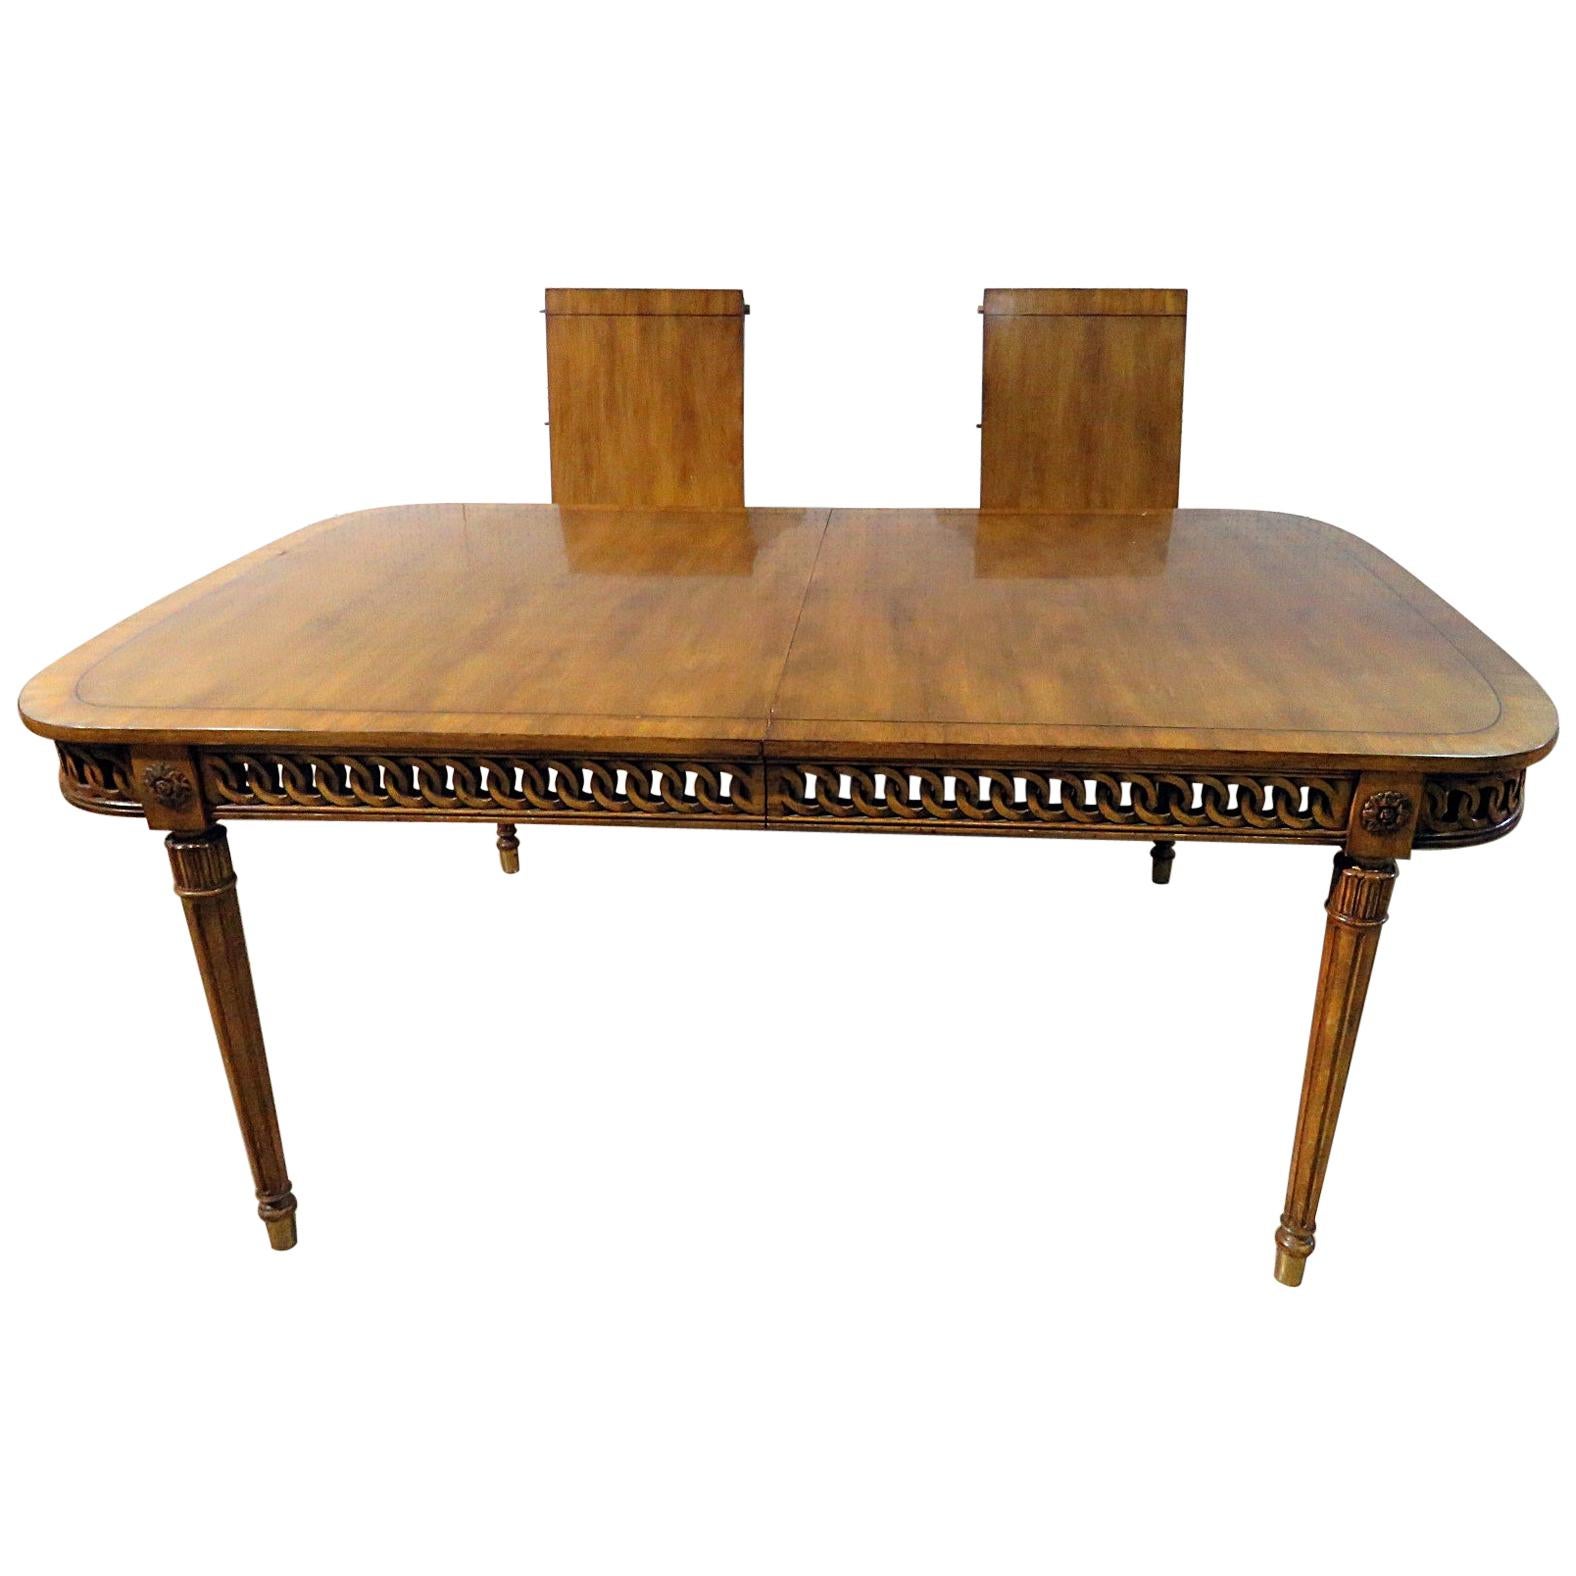 Carved Walnut French Louis XVI Style Dining Table w Pierce Carved Circular Skirt